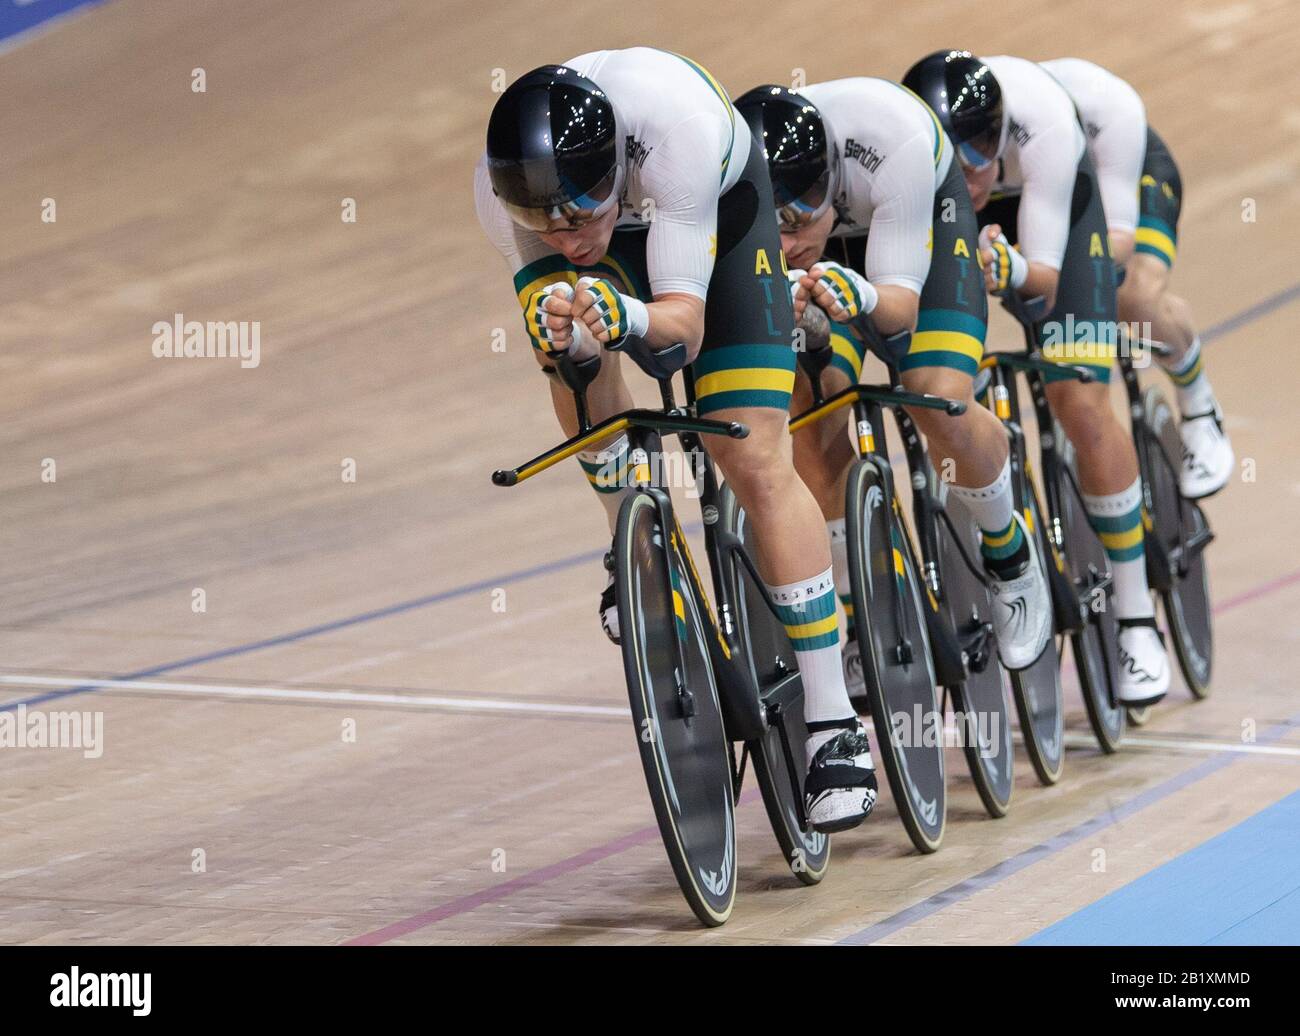 Berlin, Germany. Feb, 2020. Cycling/track: World Championship, team pursuit, men, finals: The team from Australia, Porter, Sam Welsford, Lucas Plapp and Leigh Howard ride on the track. Credit: Sebastian Gollnow/dpa/Alamy